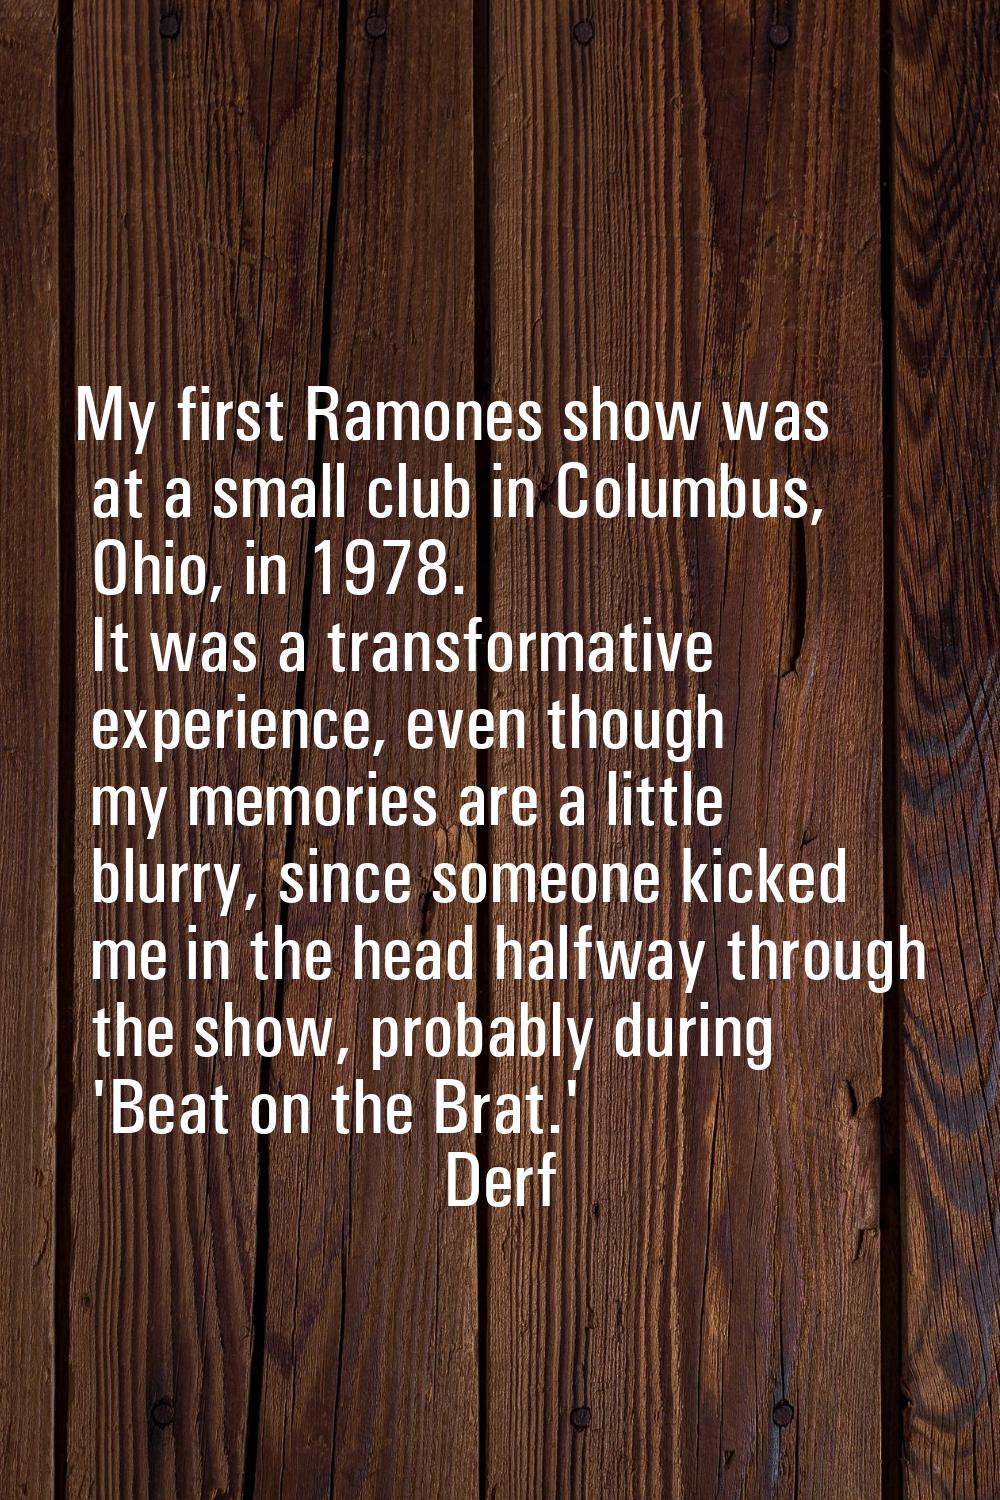 My first Ramones show was at a small club in Columbus, Ohio, in 1978. It was a transformative exper